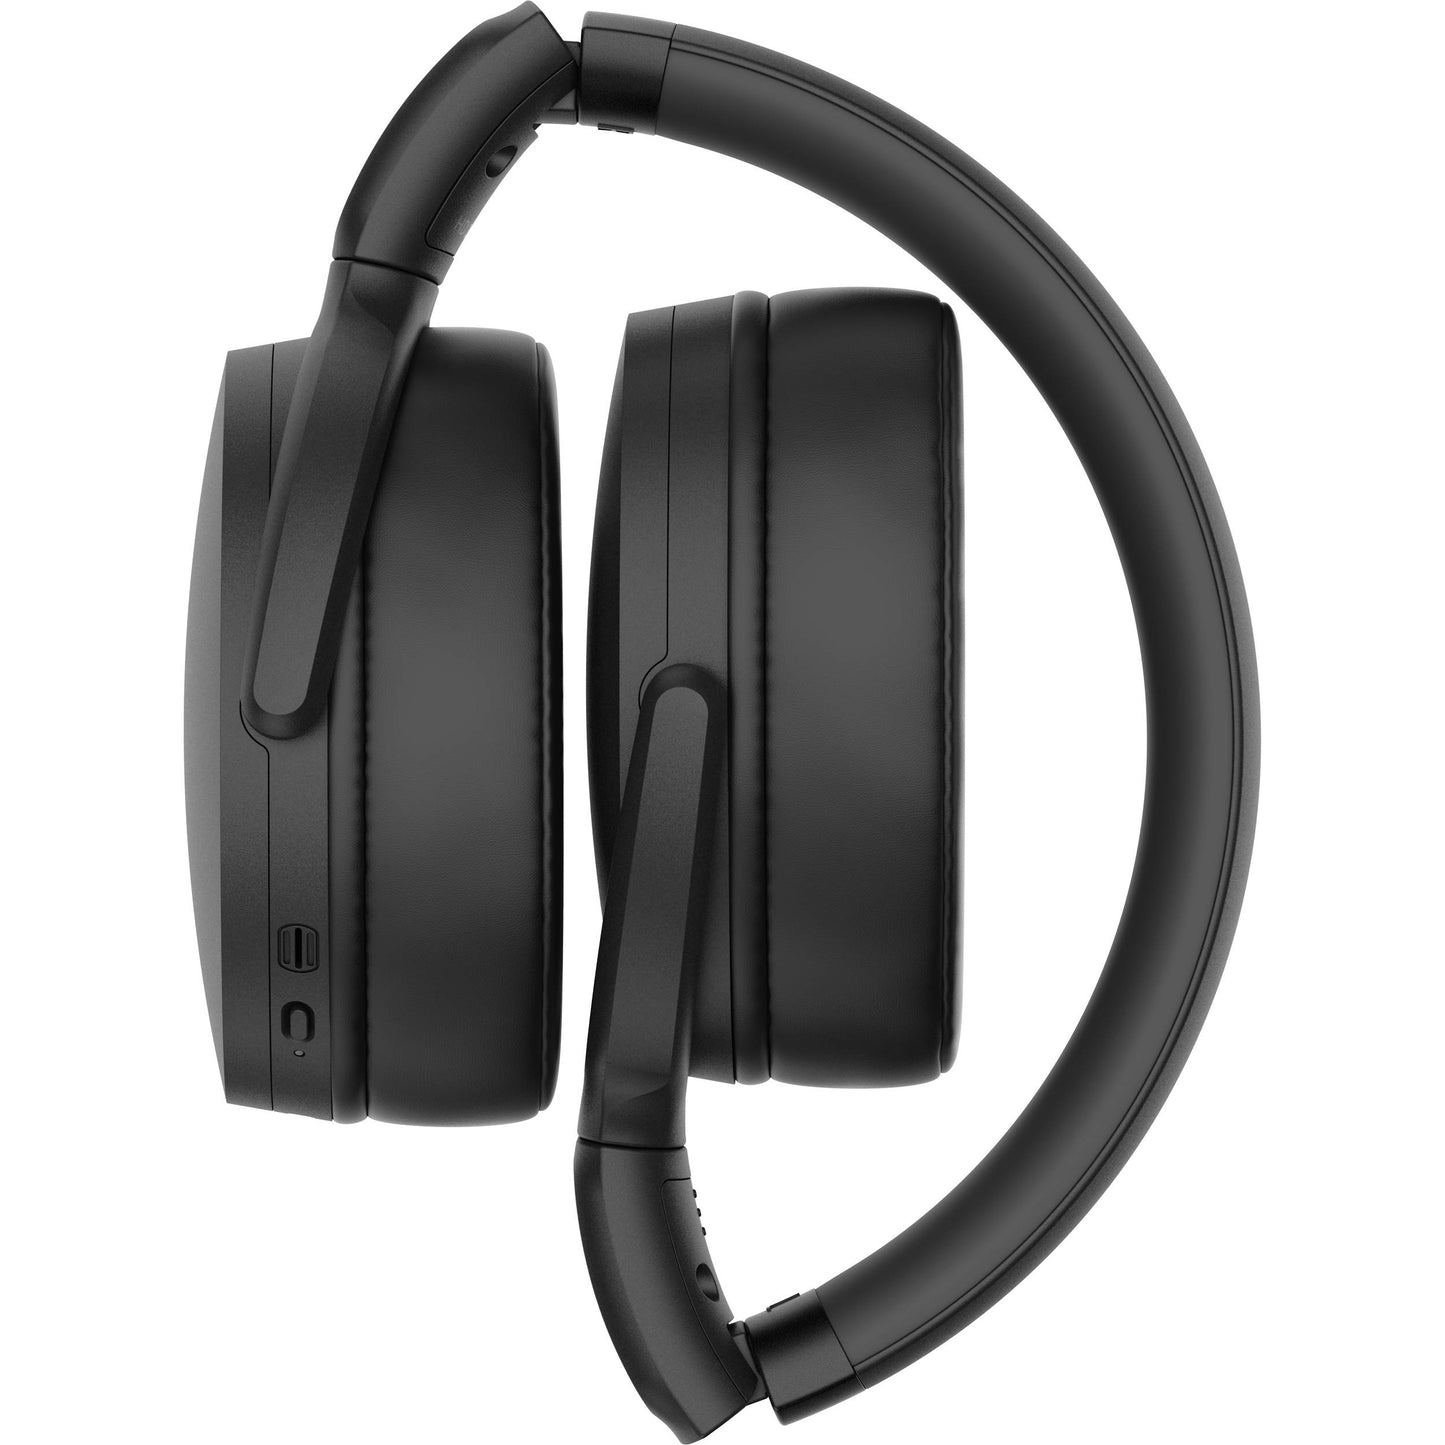 Sennheiser HD 350BT Wireless Over-Ear Headphones Foldable Bluetooth 5.0 with 2 Mics 30h Playtime Touch Controls Hands-free Calls